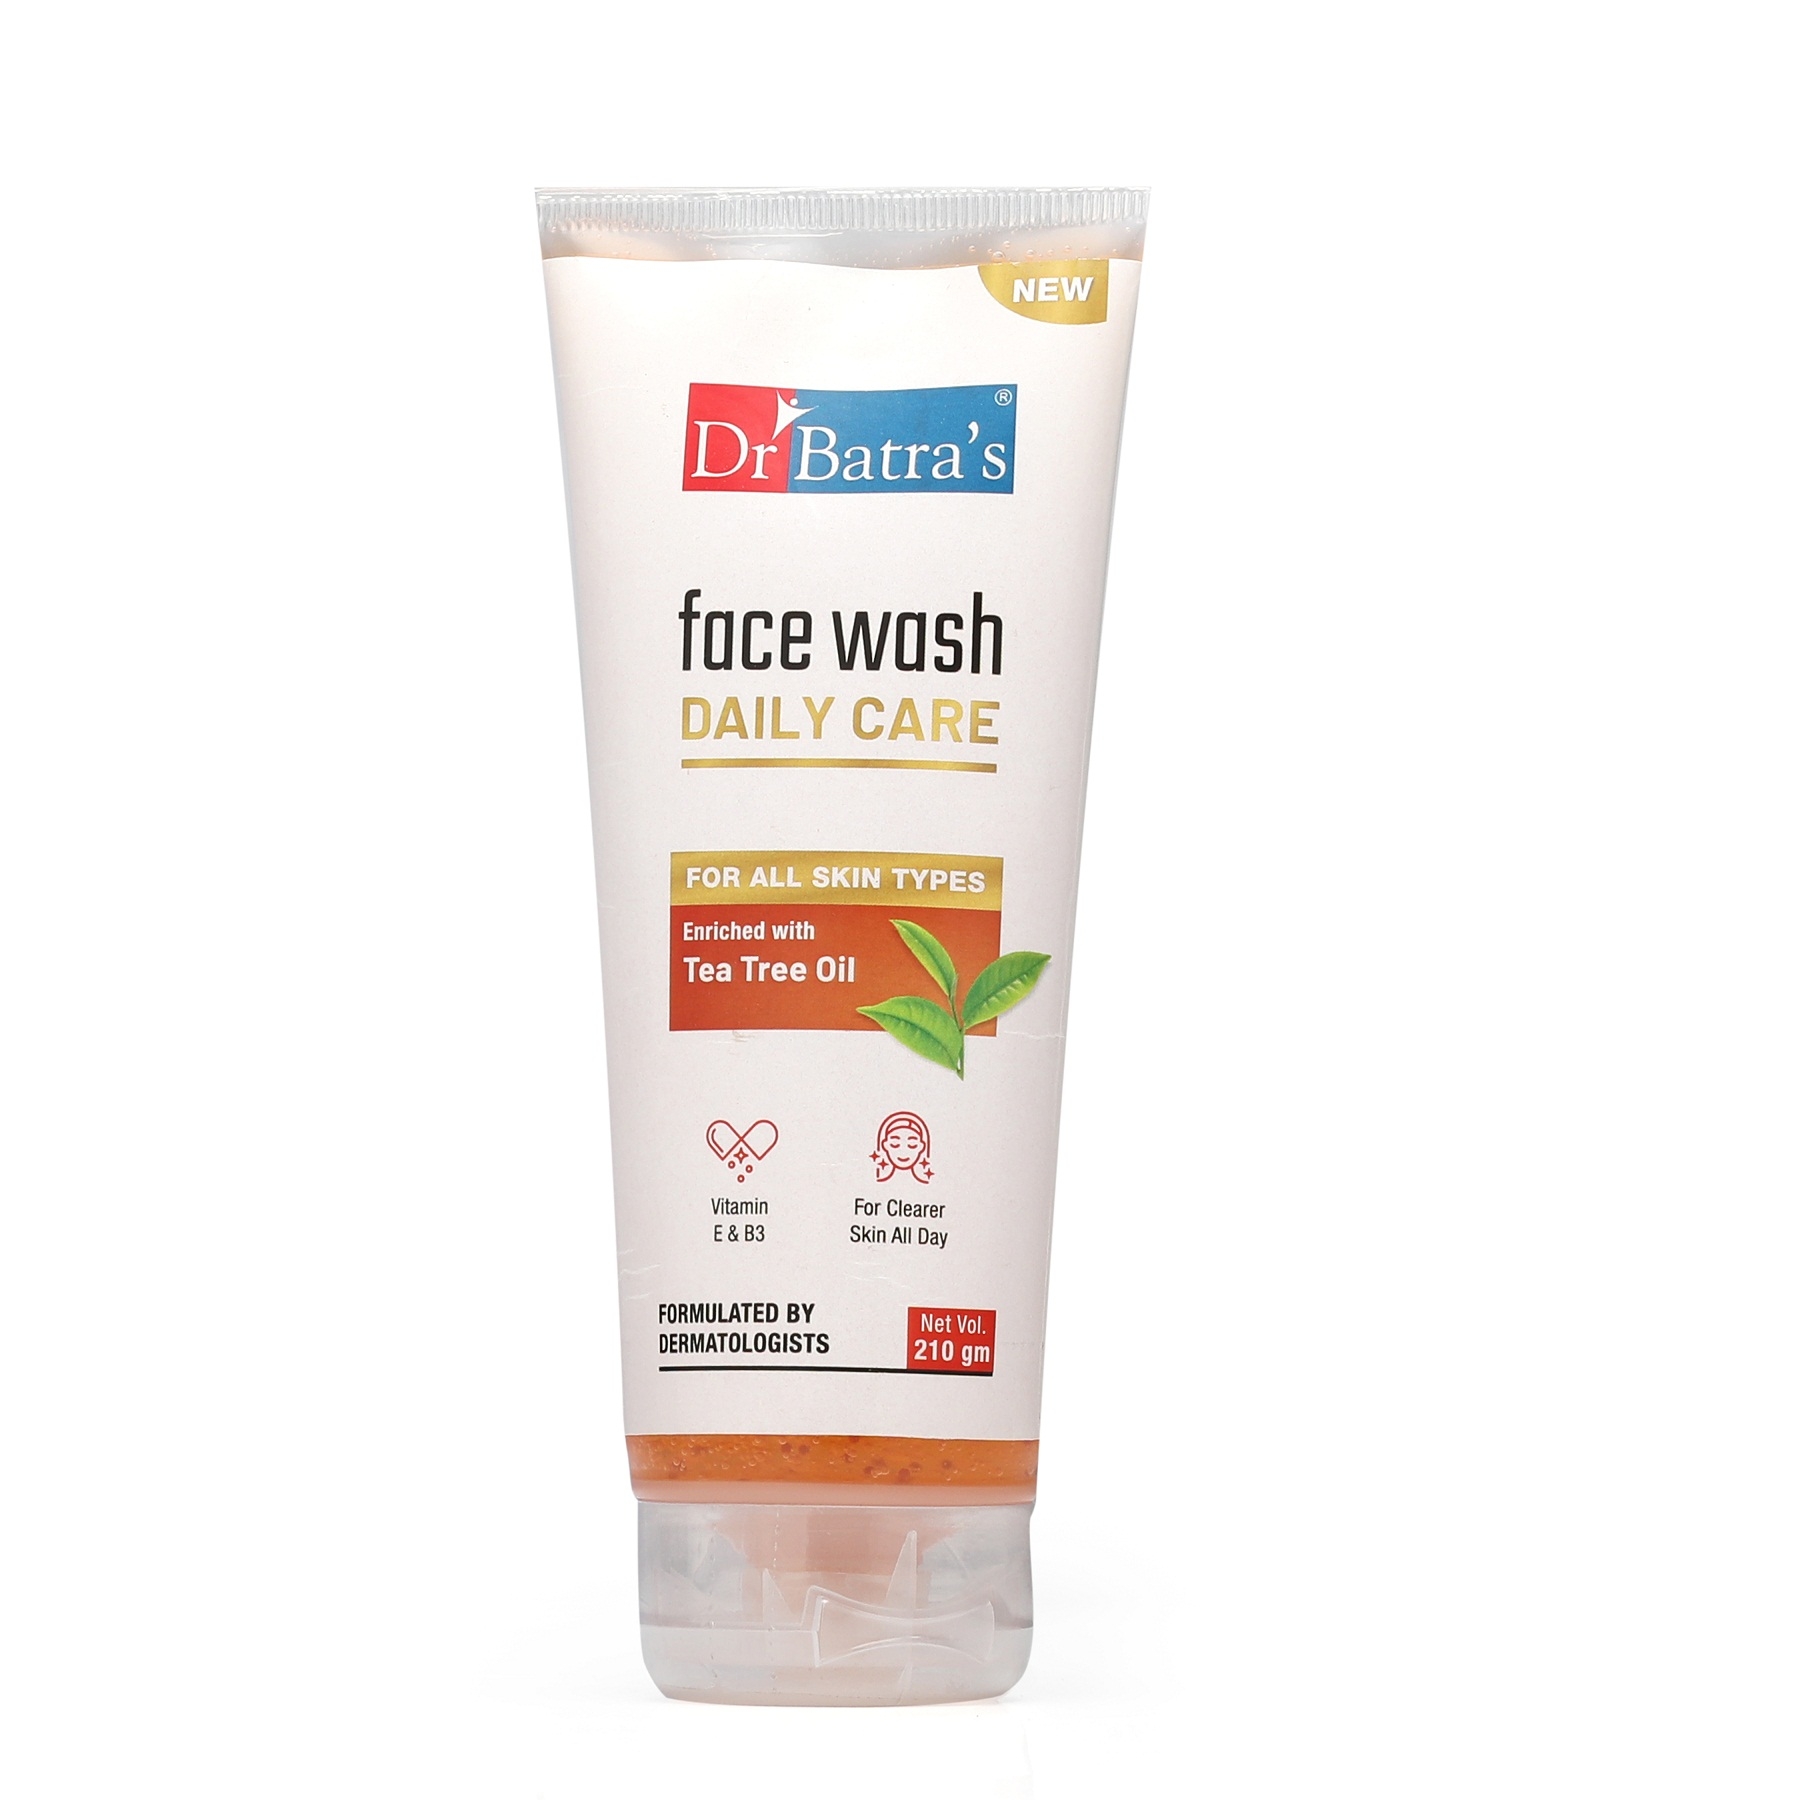 Dr Batra's | Dr Batra's Face Wash Daily Care Enriched With Tea Tree Oil - 210g 0